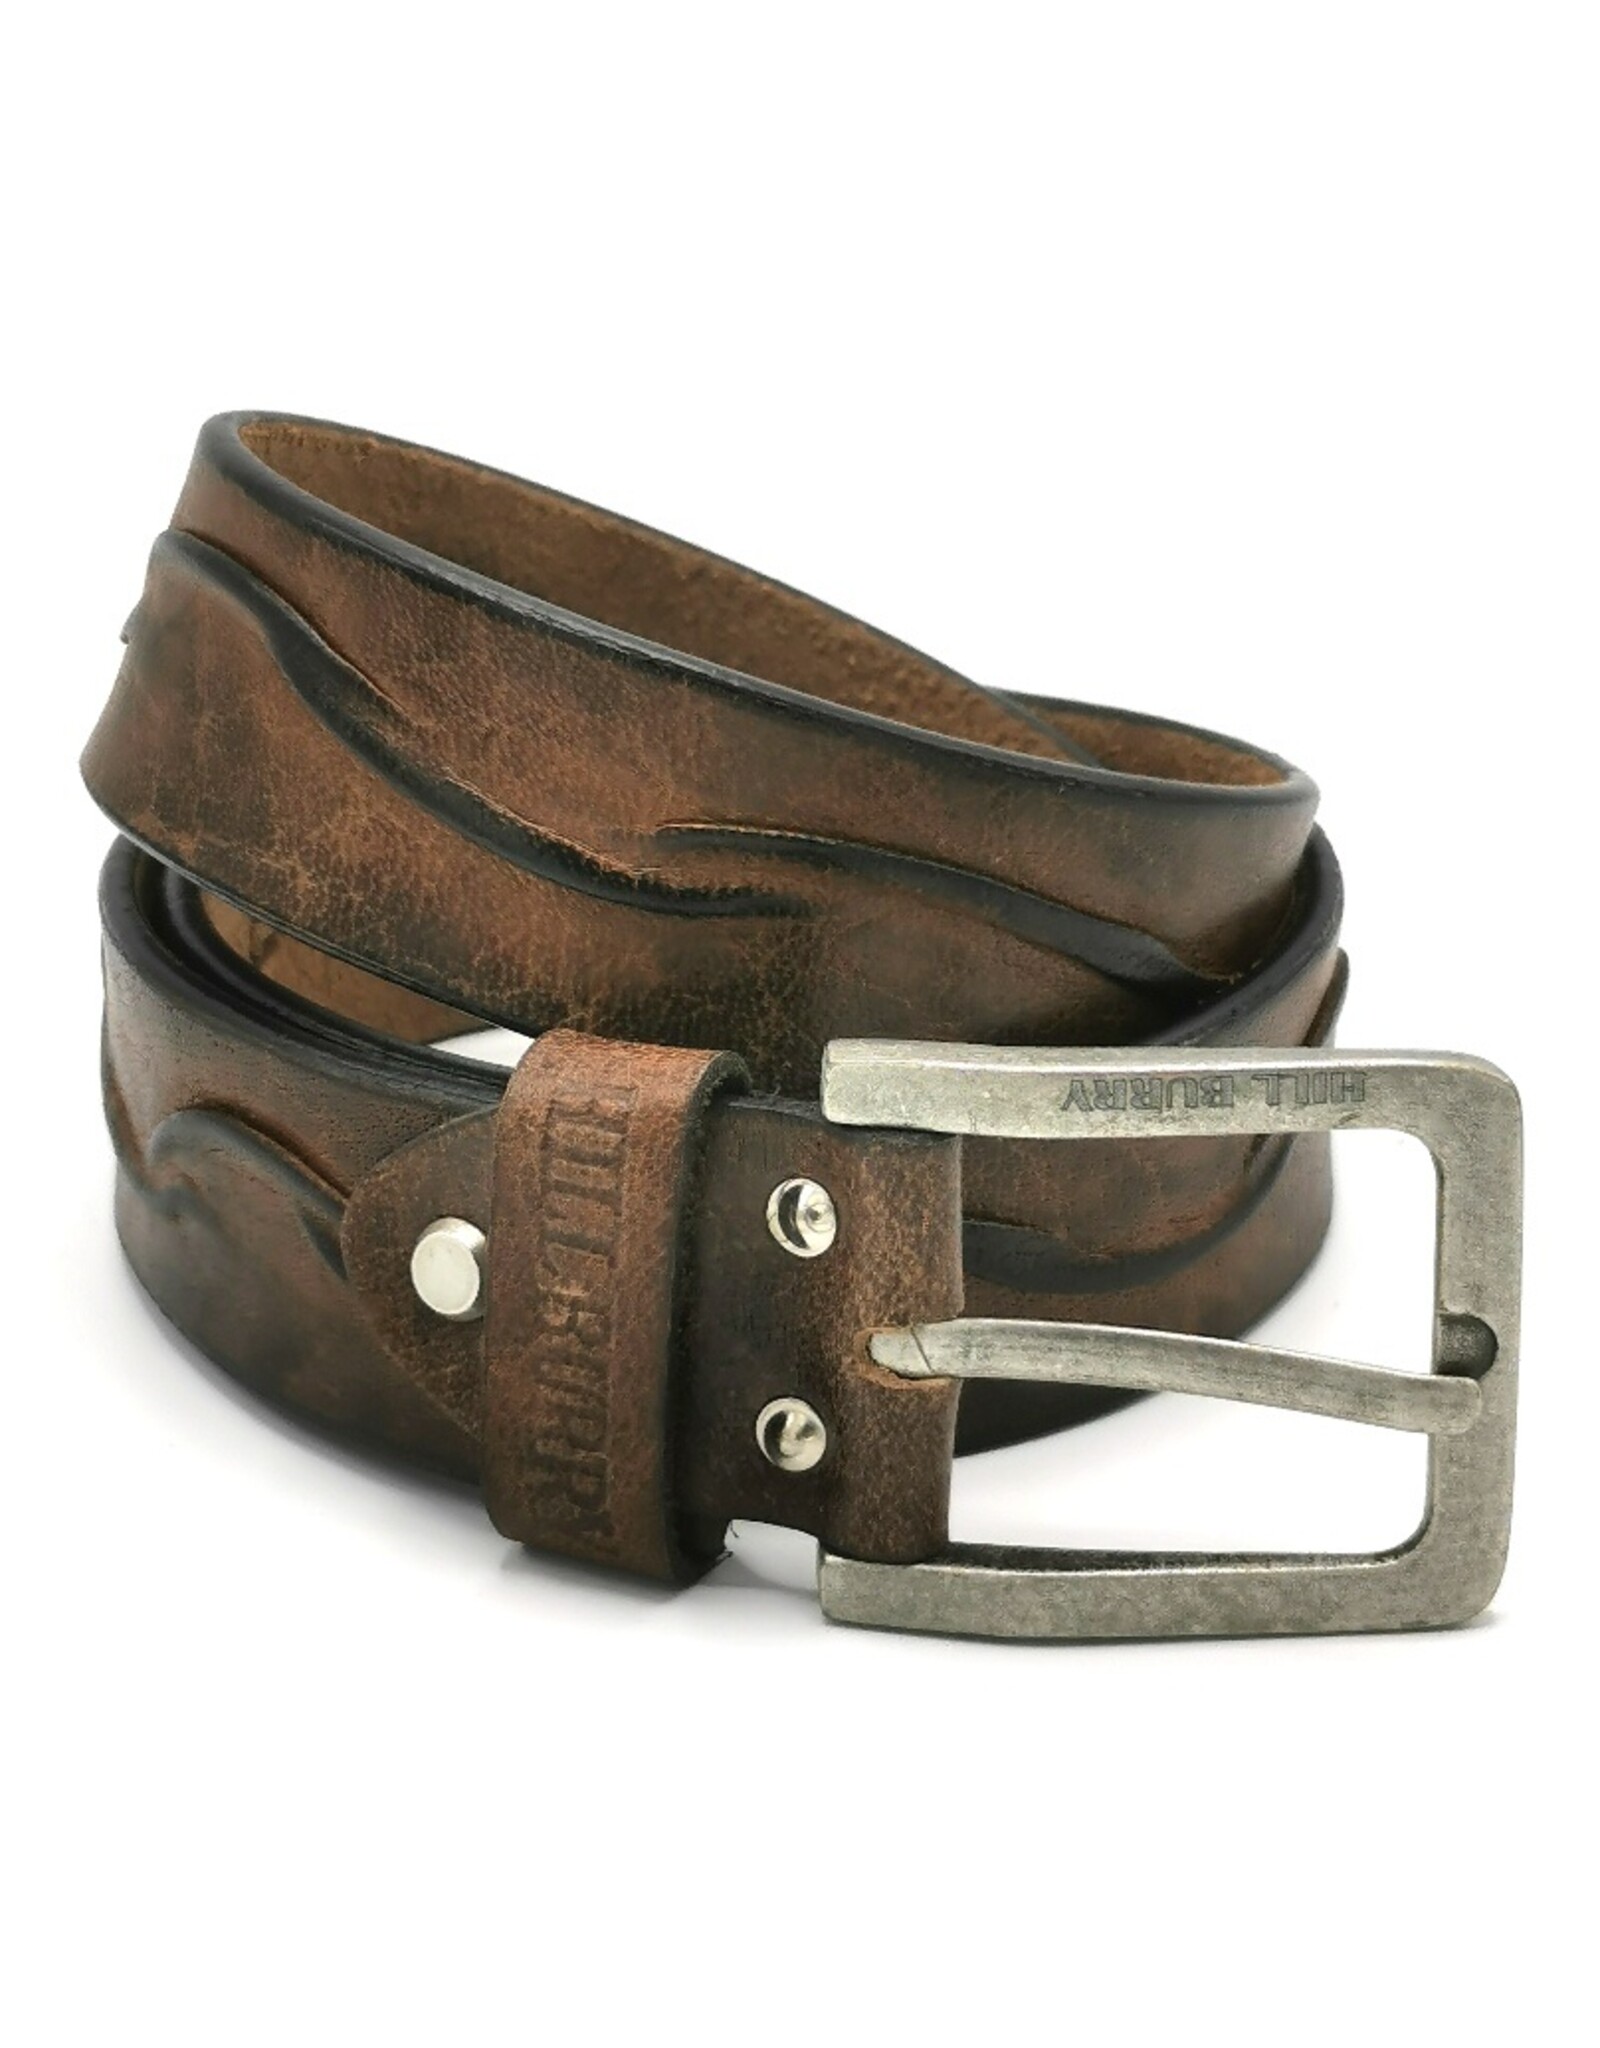 HillBurry Leather belts - HillBurry Leather belt  "Waves", solid leather